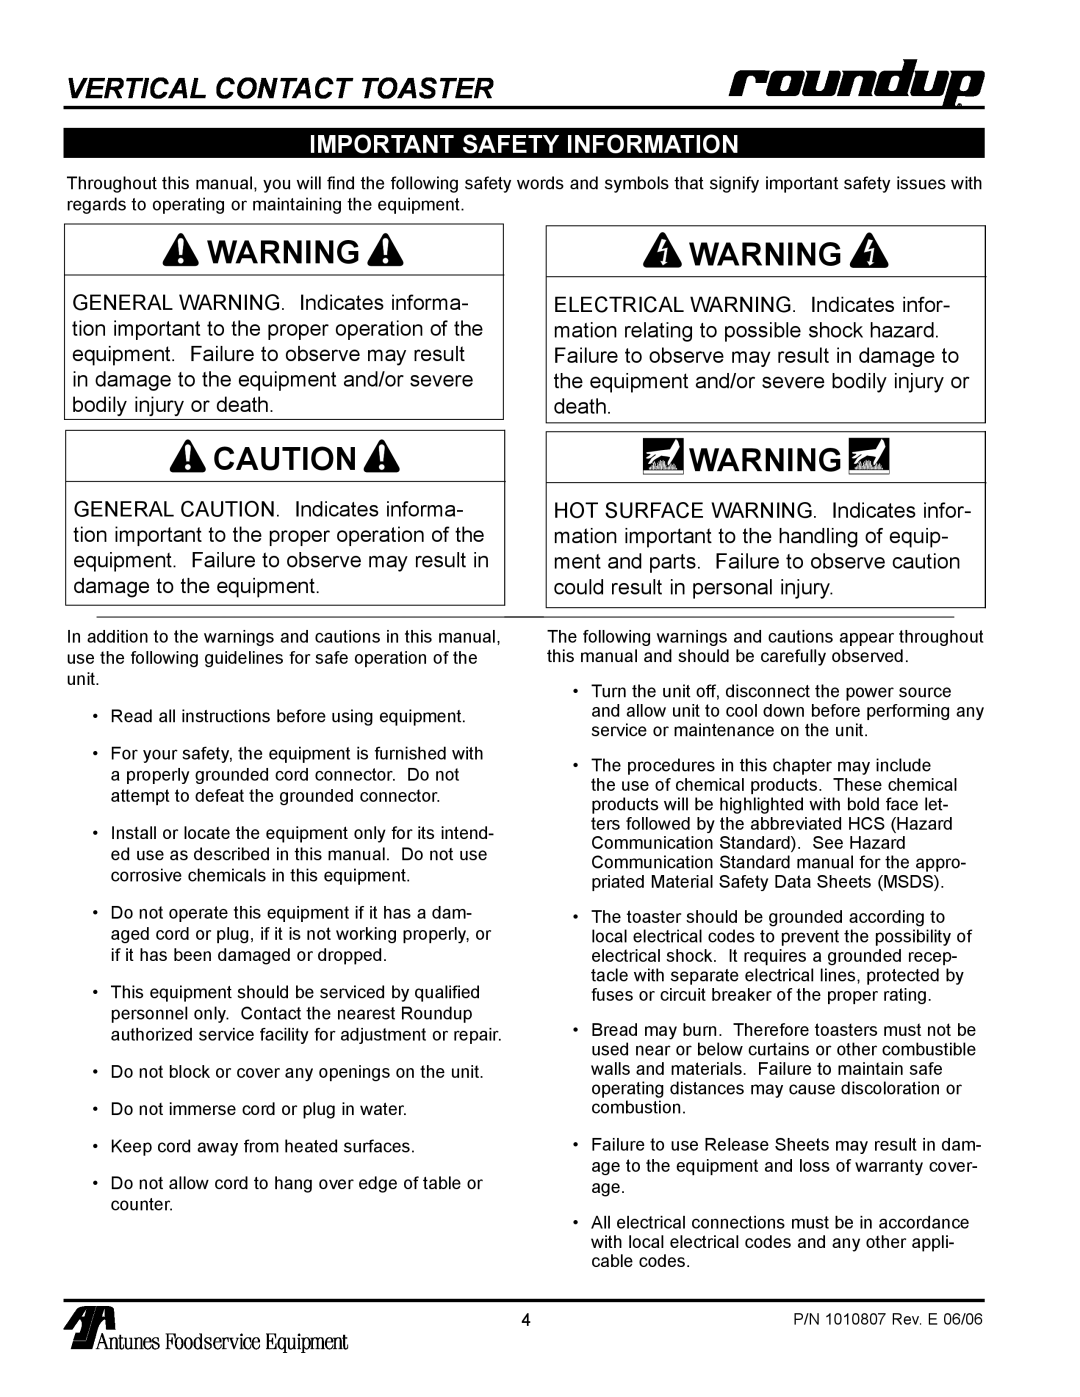 Antunes, AJ VCT-1000 owner manual Important Safety Information, Vertical Contact Toaster 